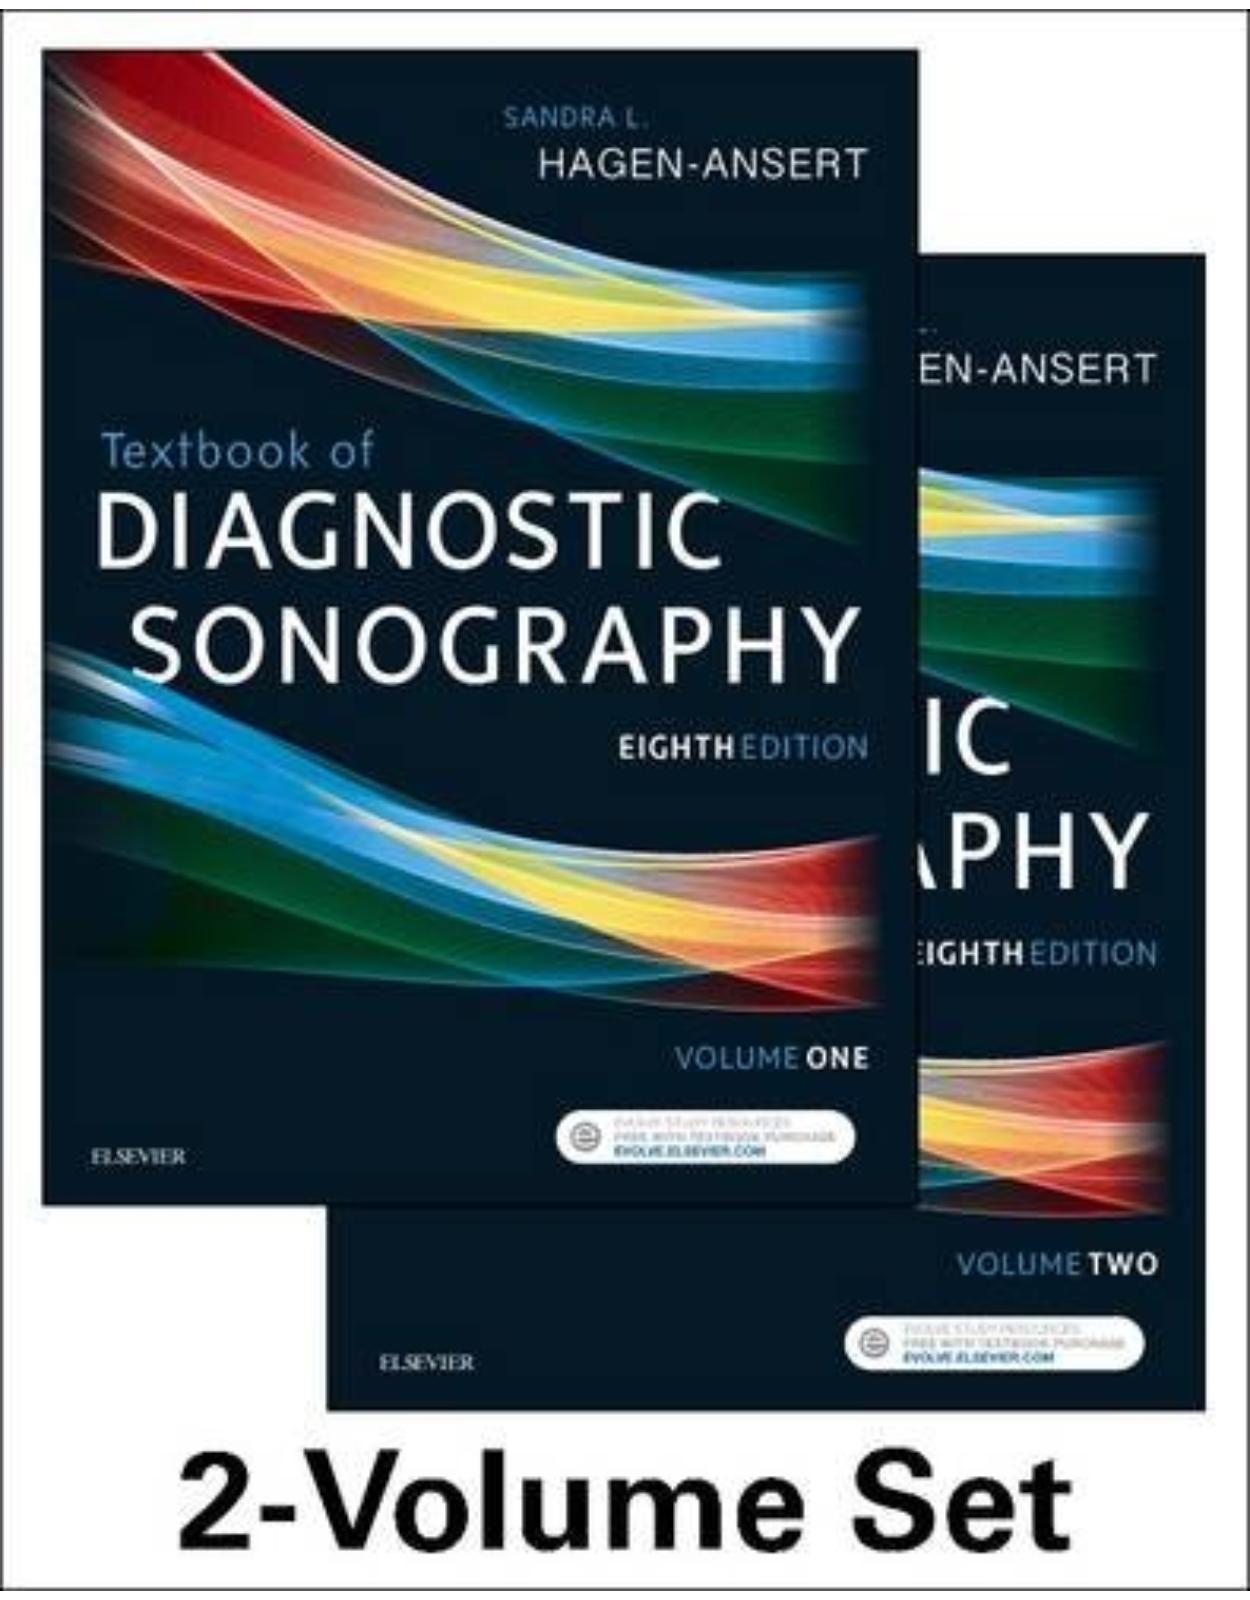 Textbook of Diagnostic Sonography, 8th Edition